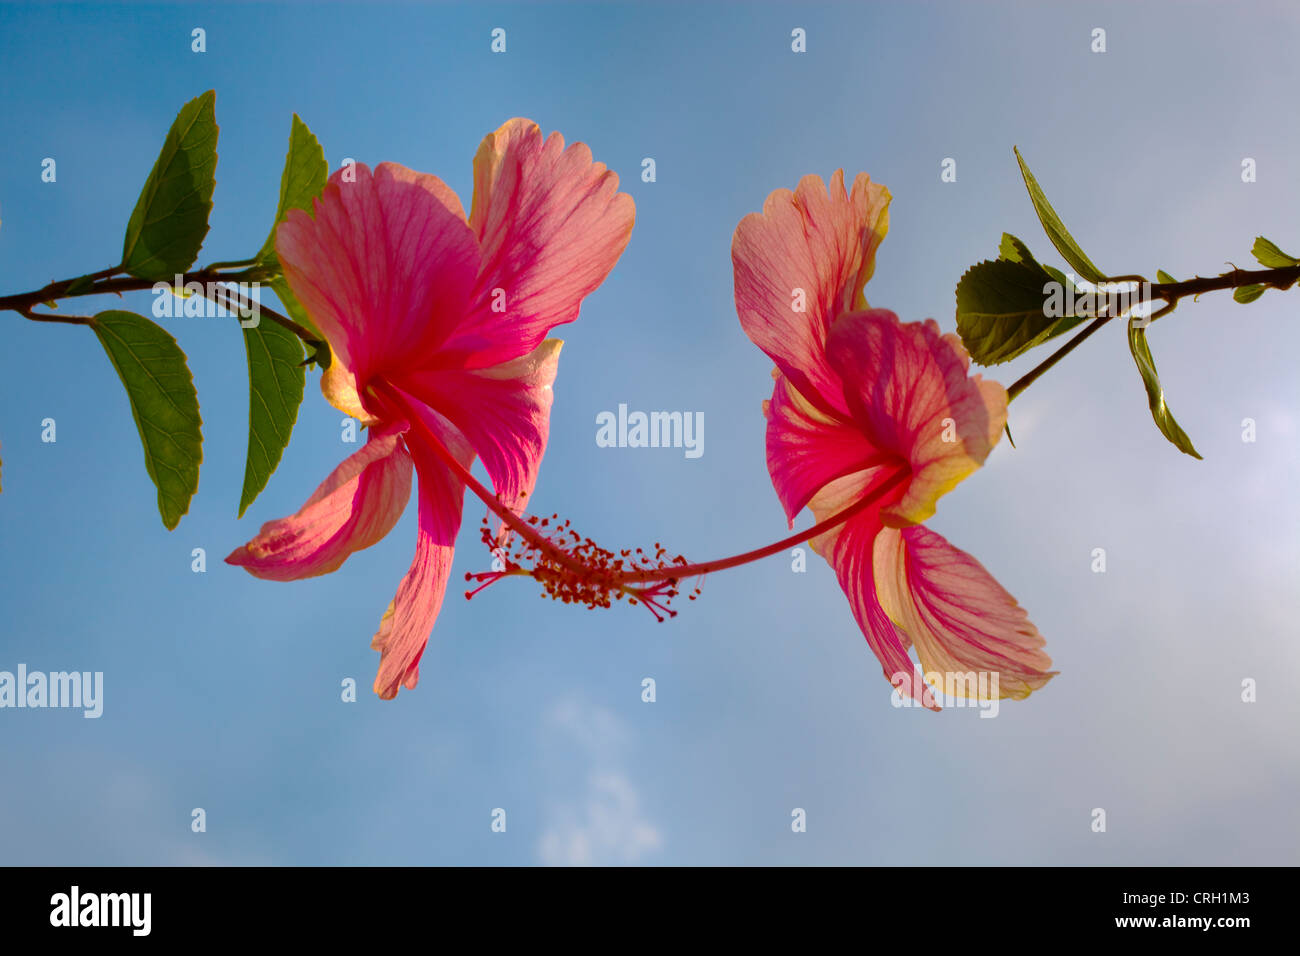 Hibiscus rosa-sinensis, Rose mallow, Two red flowers with entwined stigma against a blue sky. Stock Photo